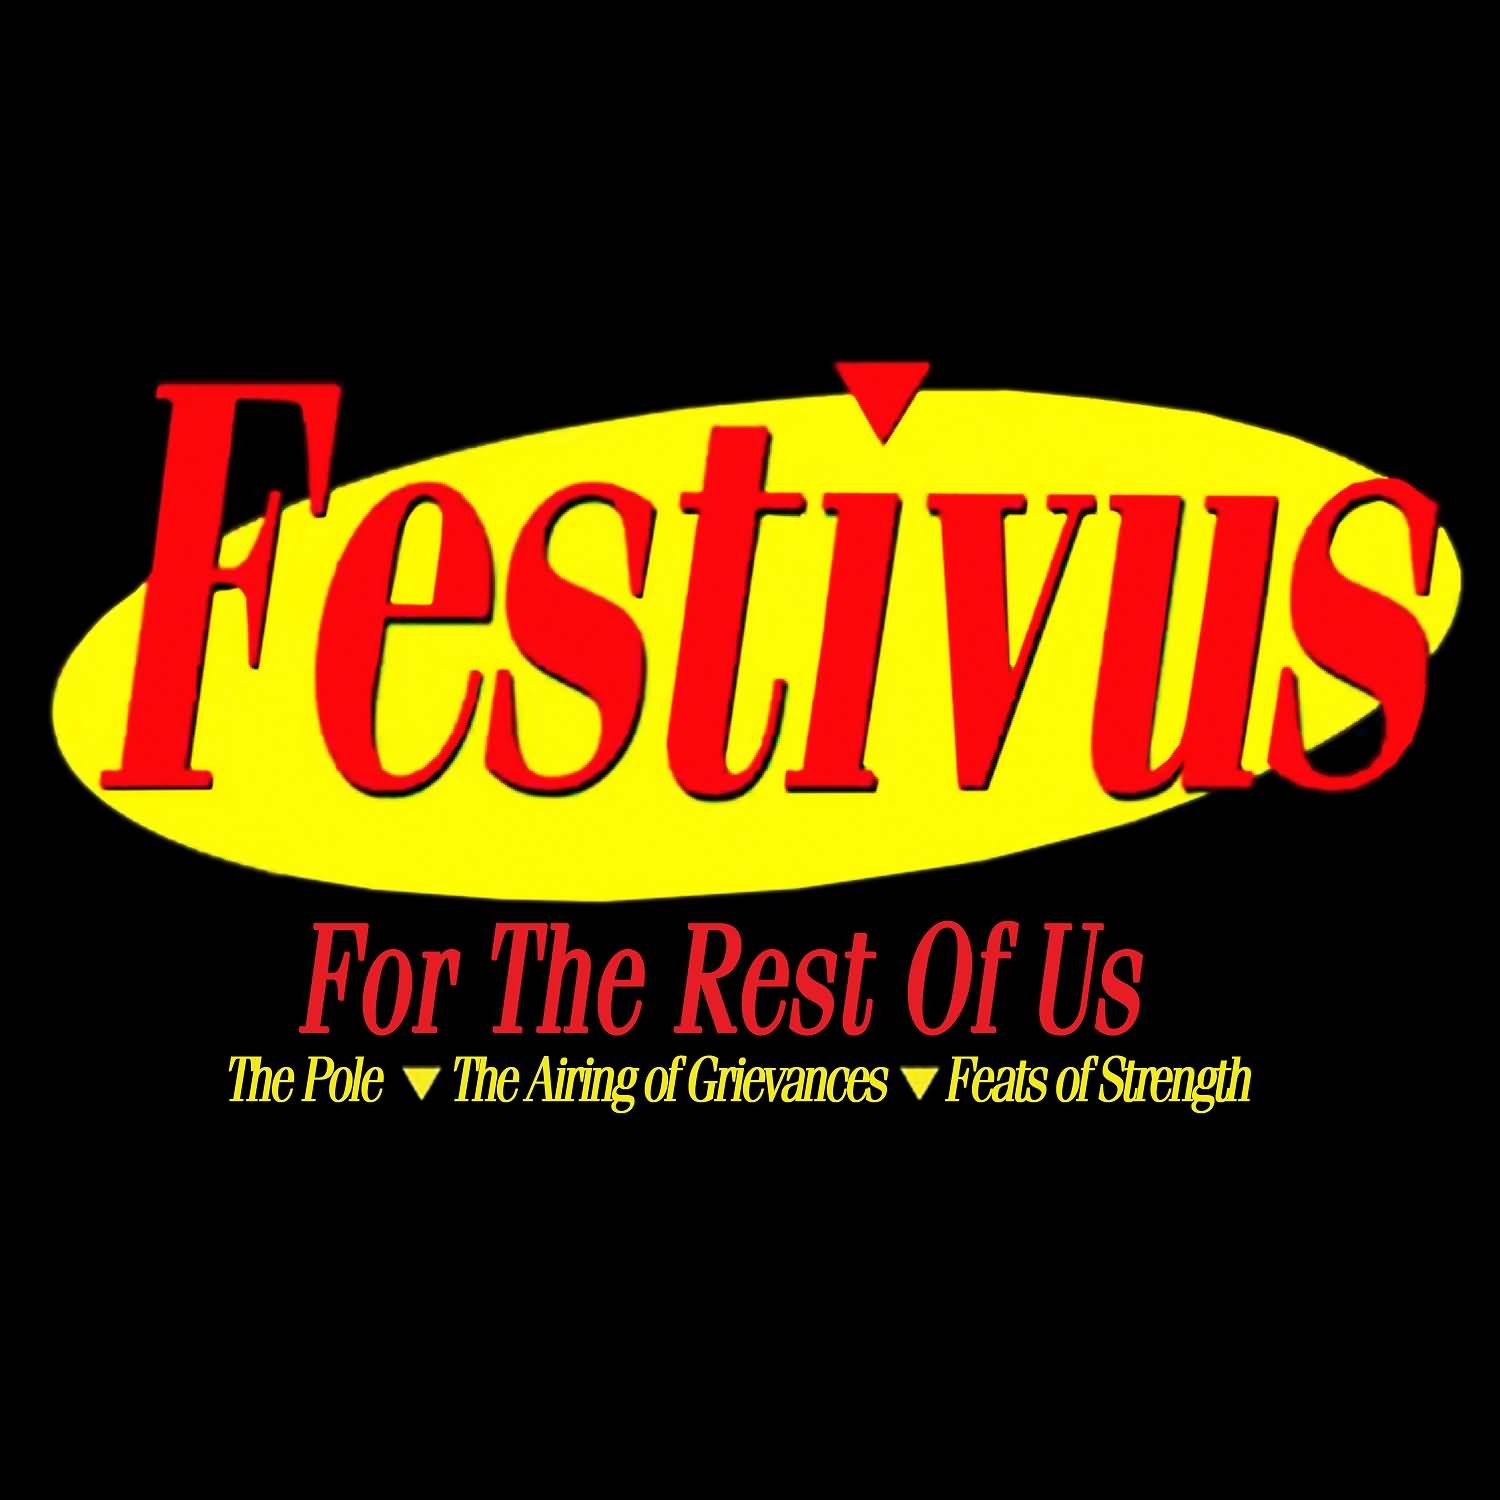 Festivus For The Rest Of Us The Pole The Airing Of Grievances Feats Of Strength